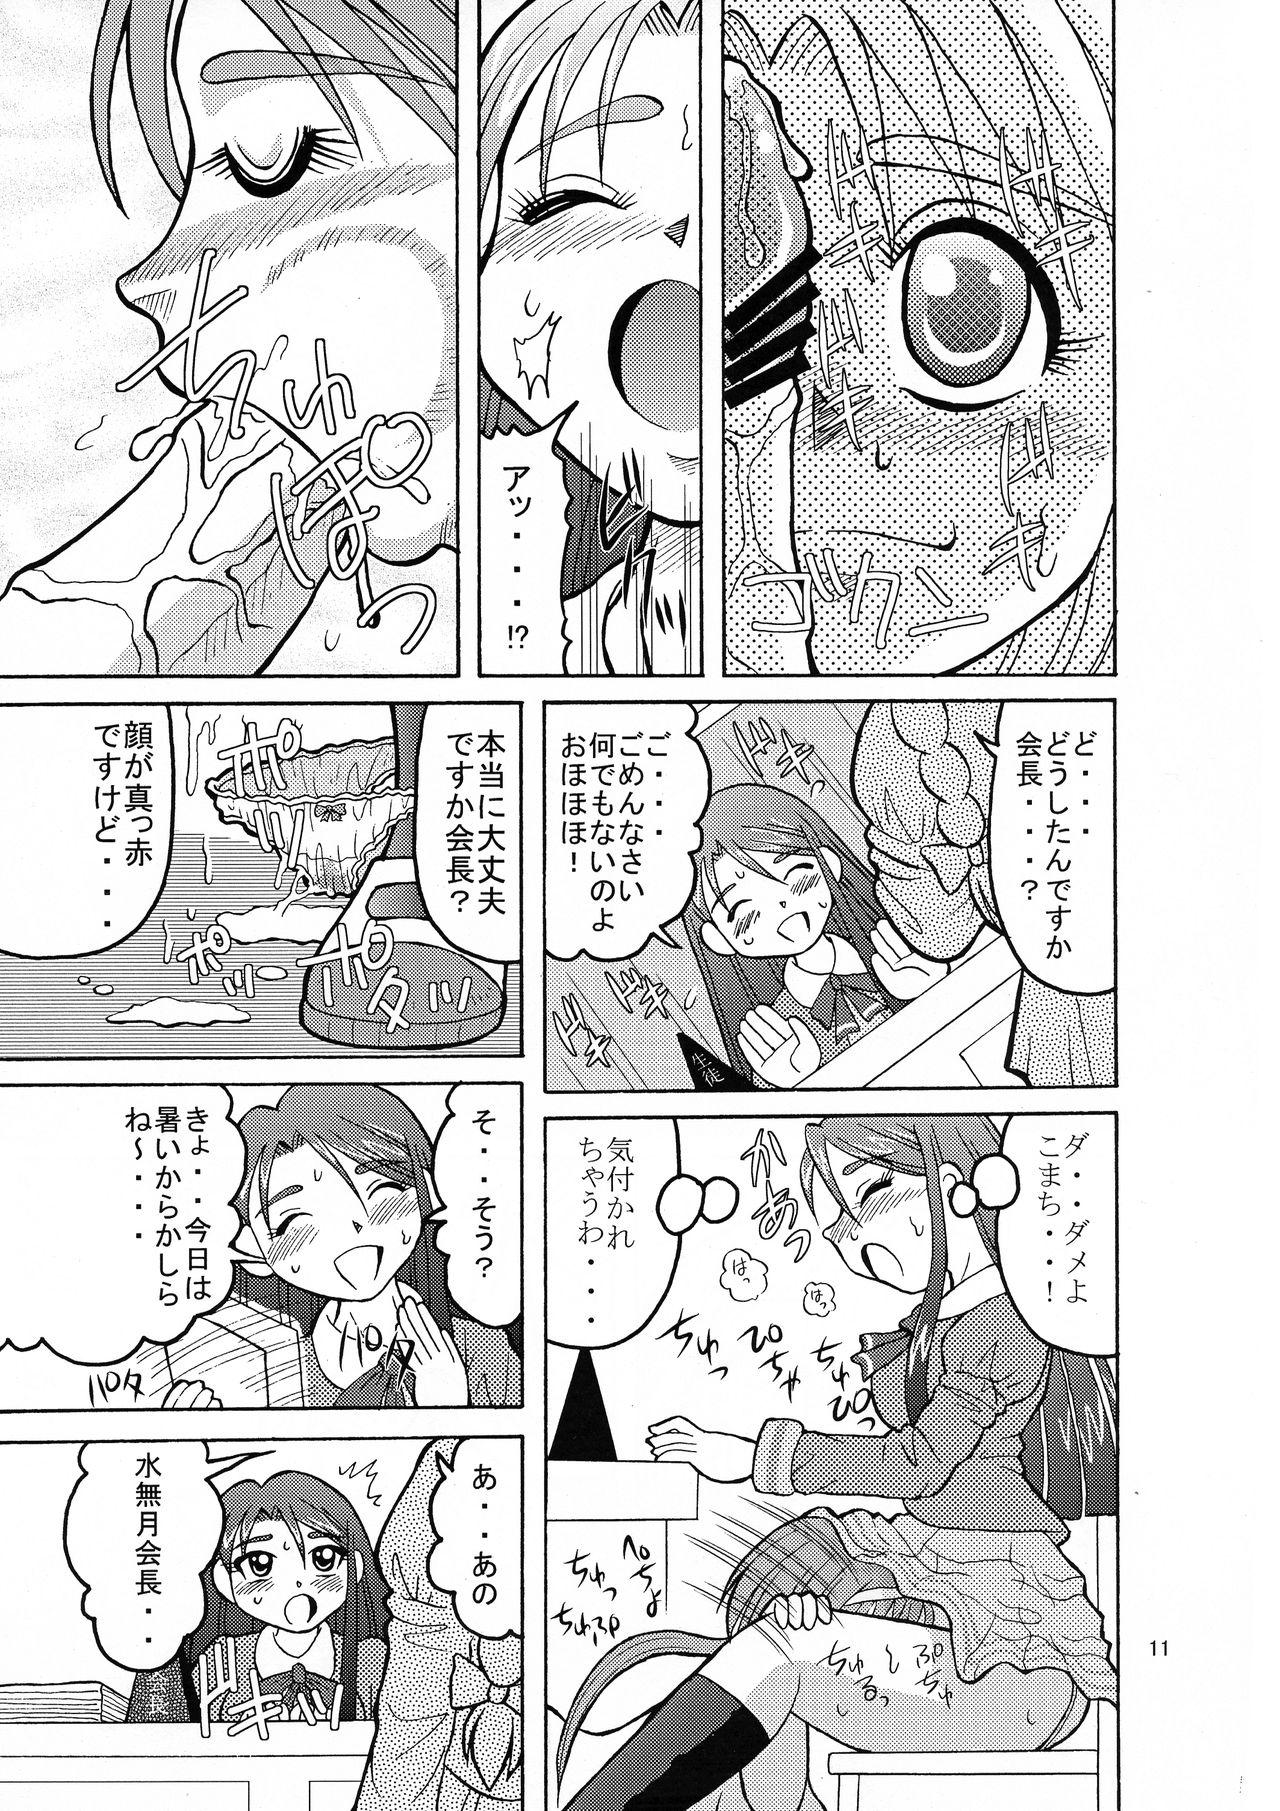 Latex Komakare GO! GO! - Yes precure 5 Sluts - Page 11